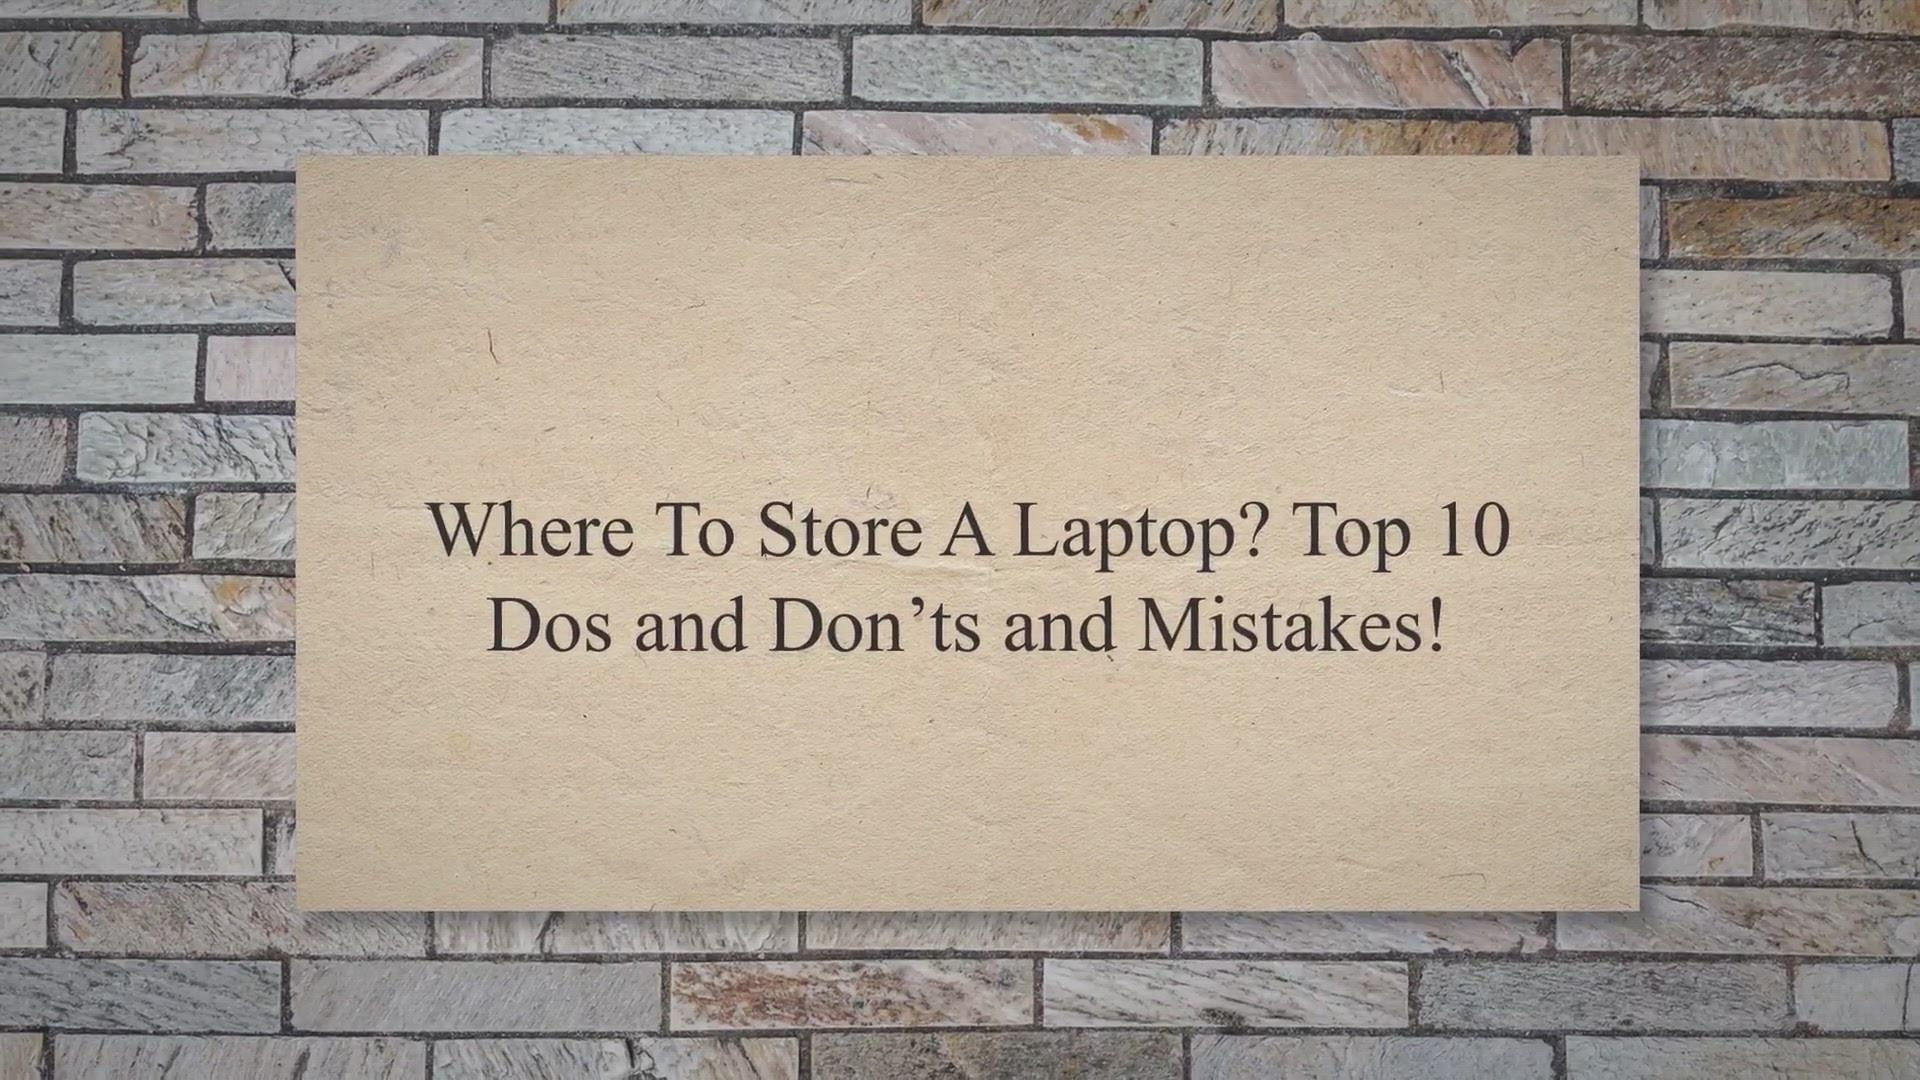 'Video thumbnail for Where To Store A Laptop? Top 10 Dos & Don’ts & Mistakes!'